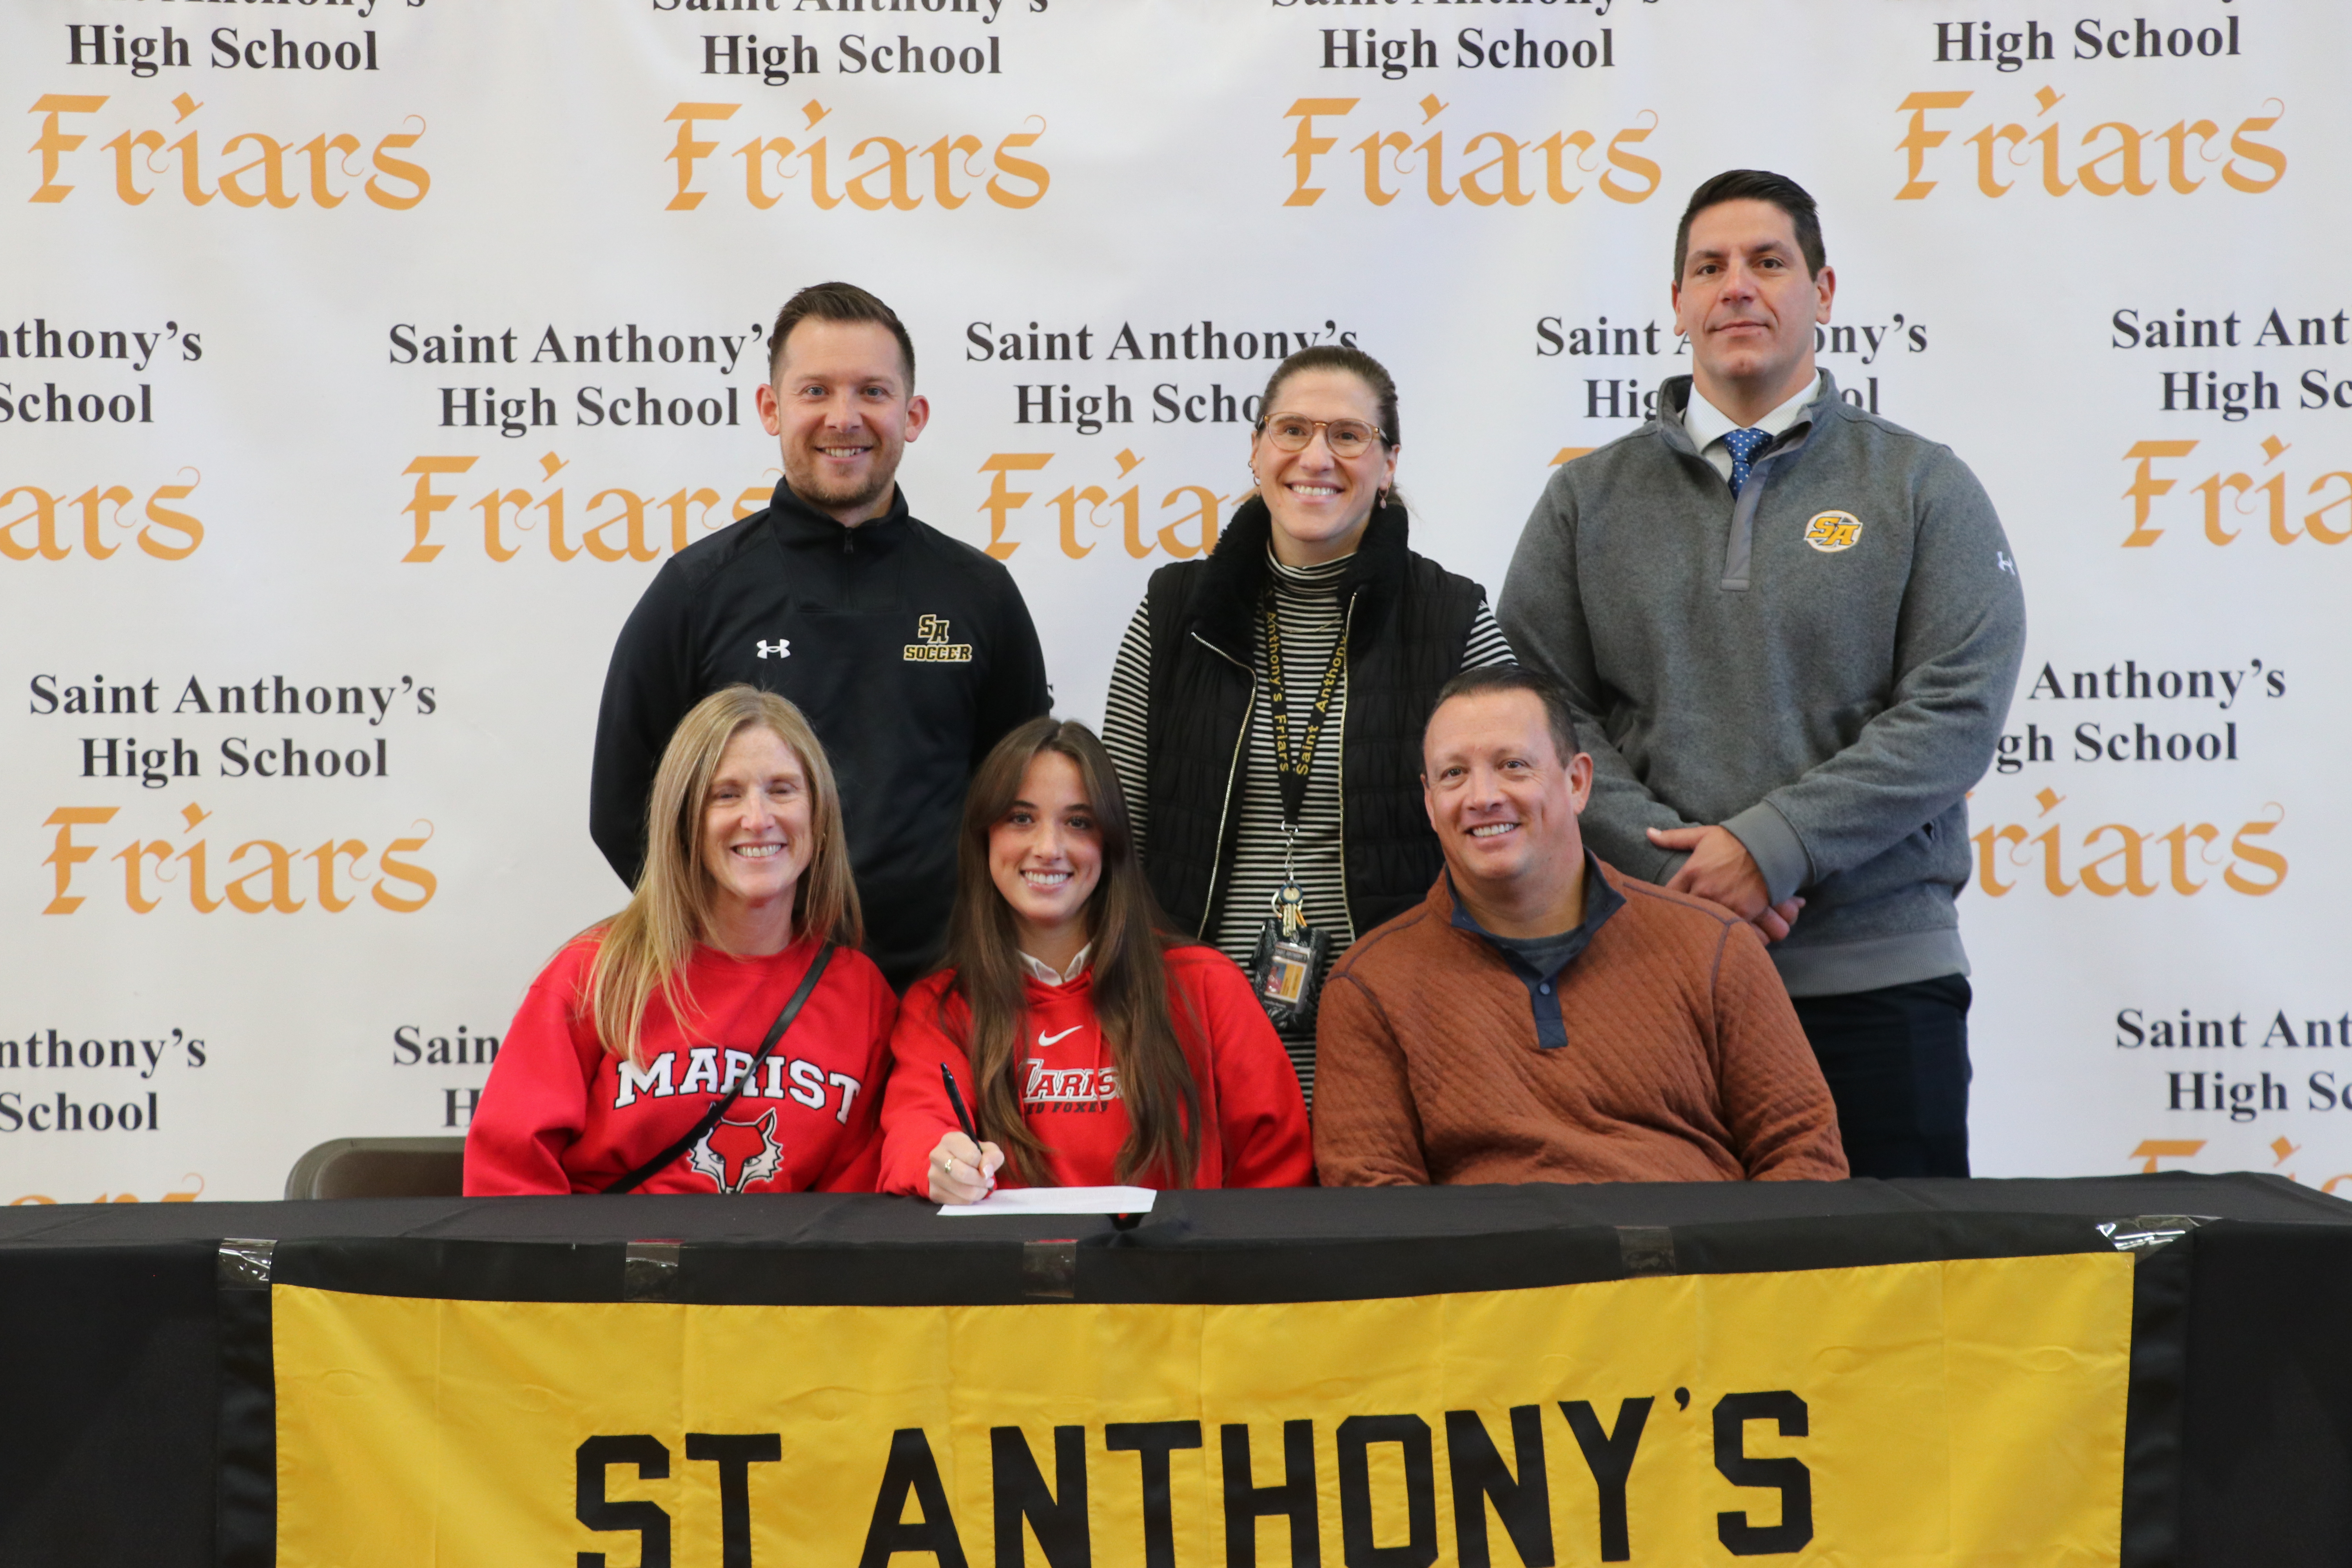 Sophia Dorsey committed to Marist College- CONGRATULATIONS